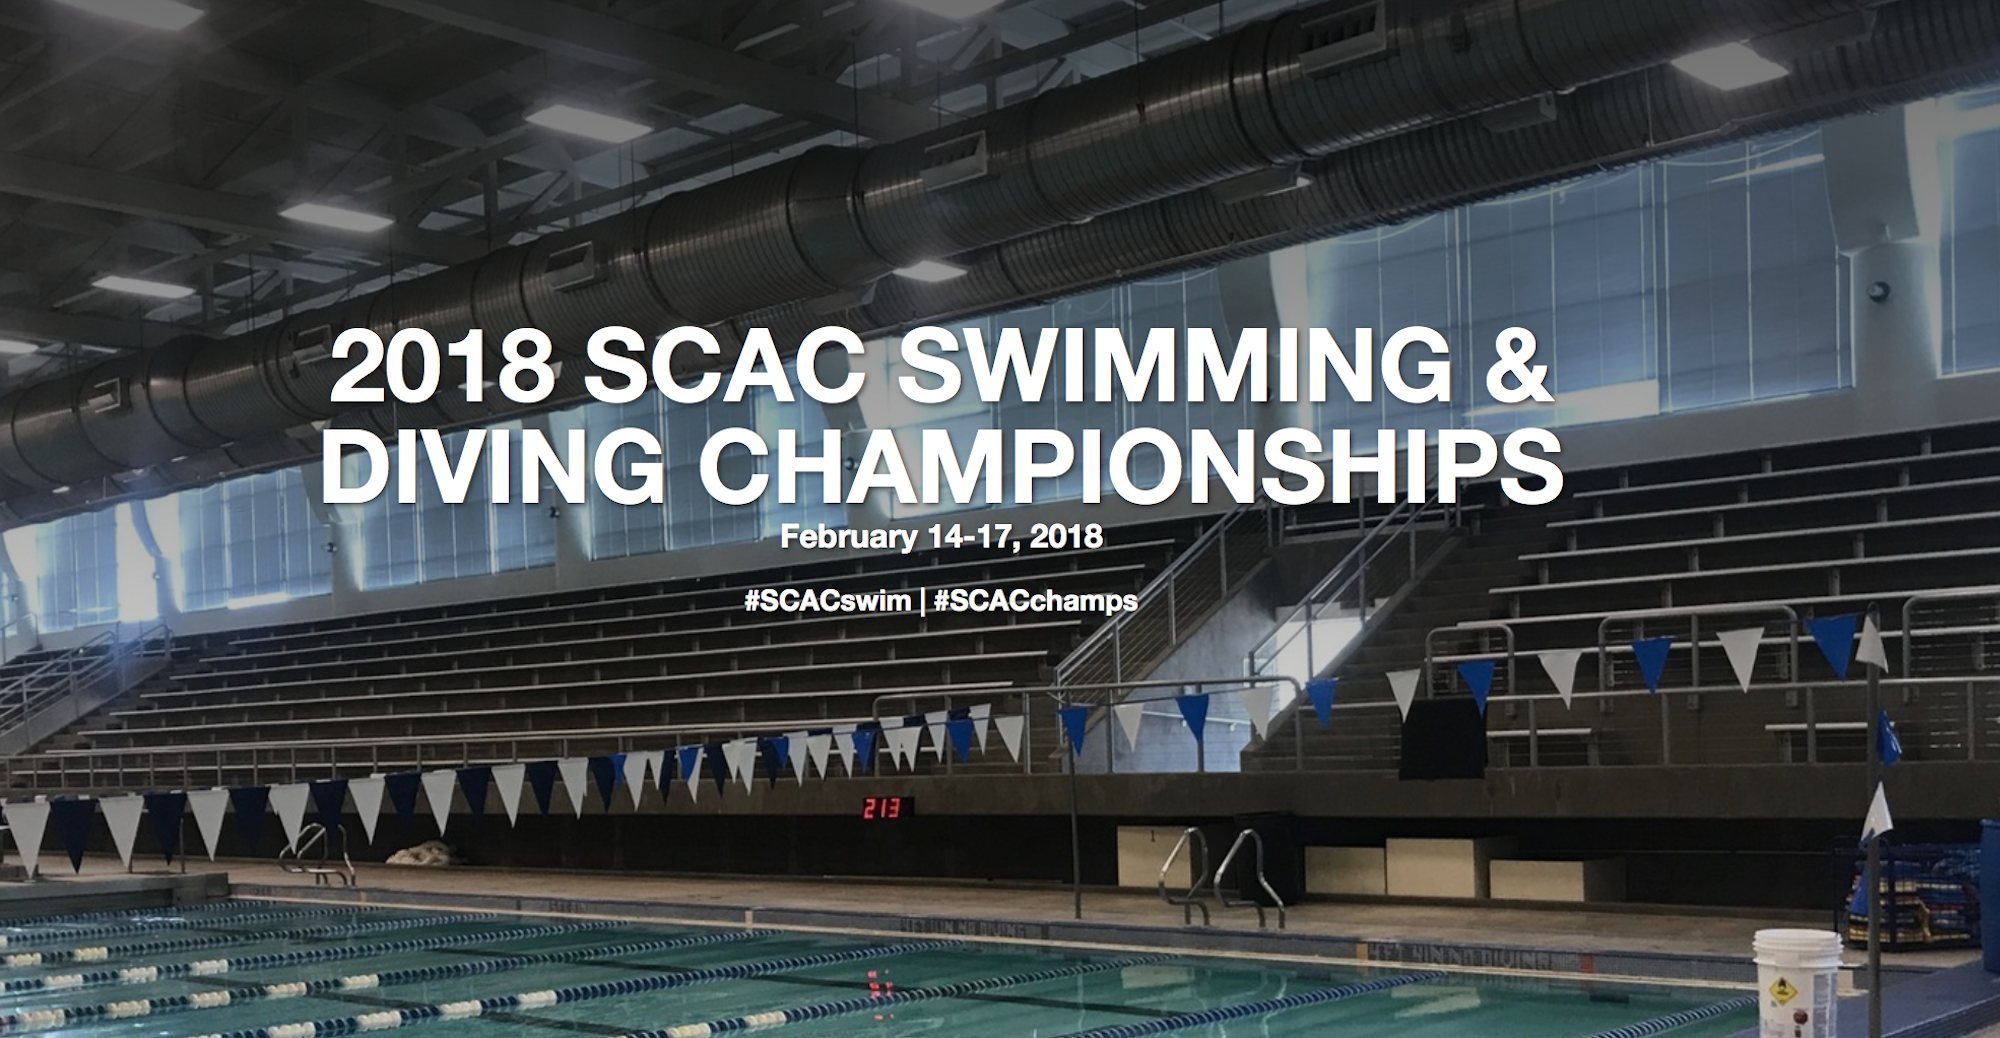 'Roo Swimming and Diving Headed to SCAC Championship Meet